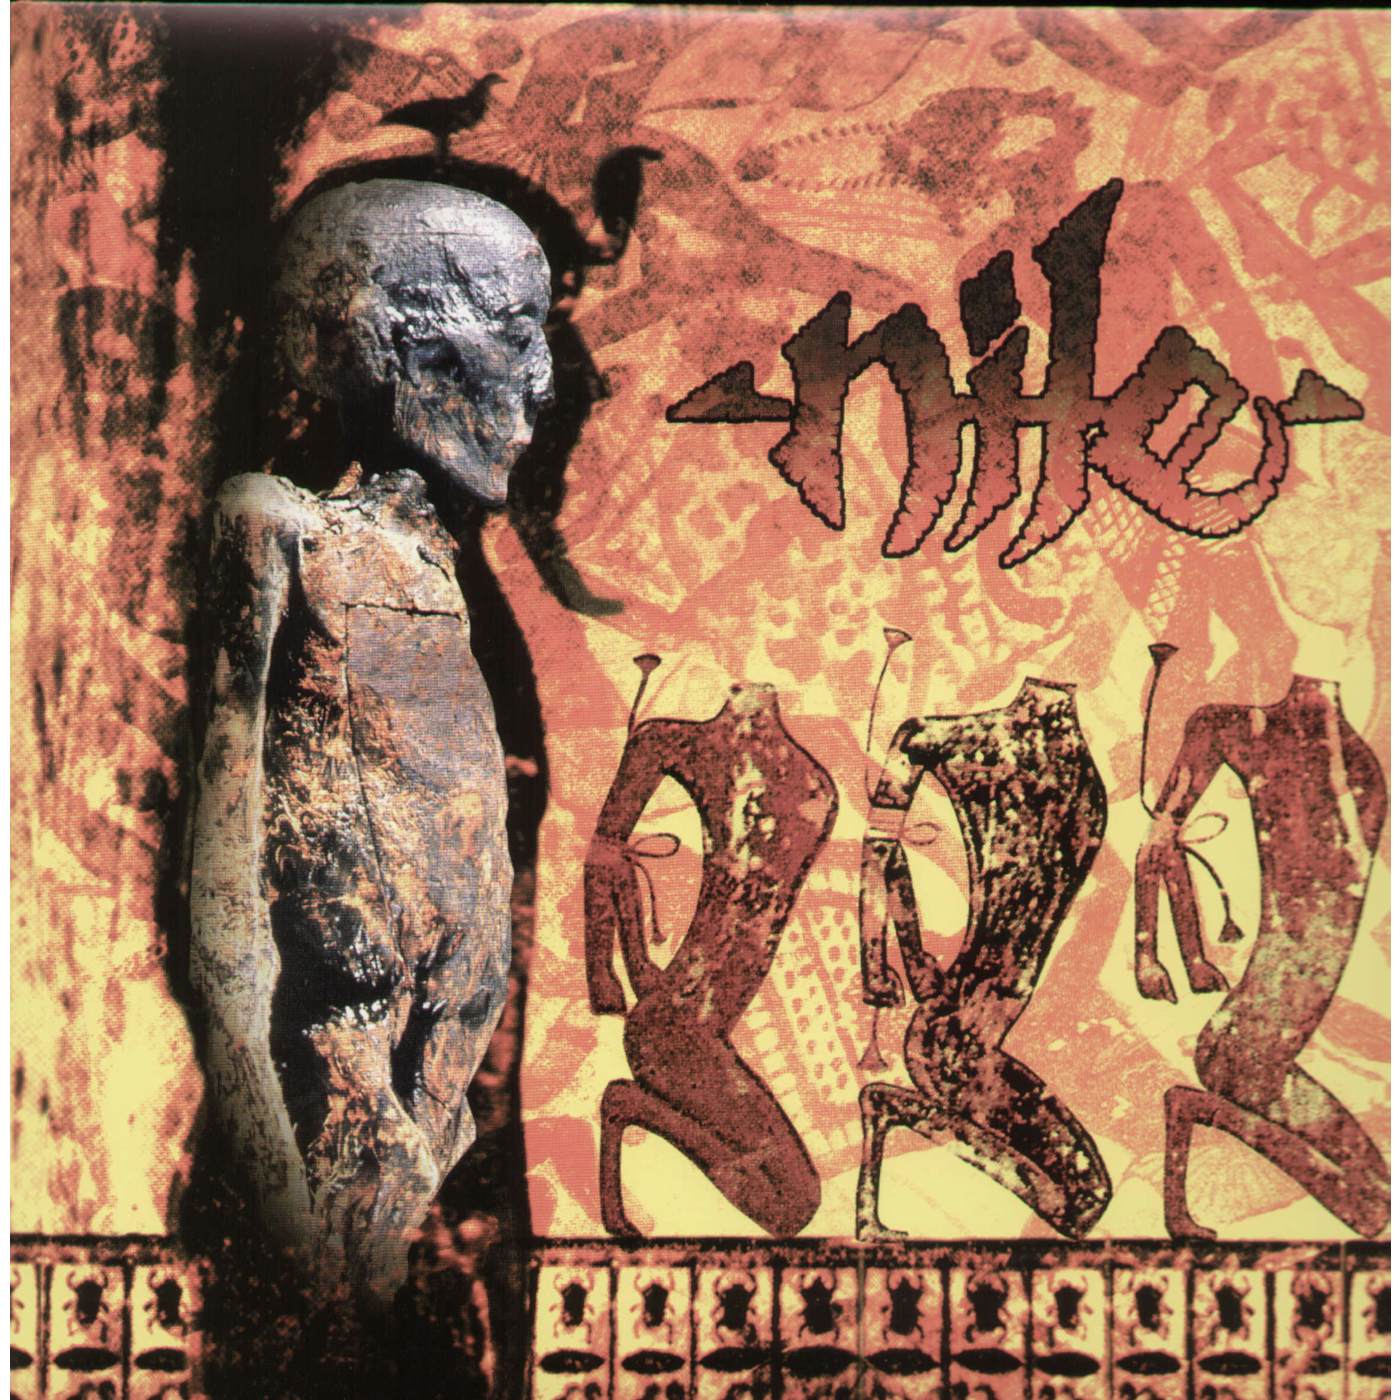 Nile AMONGST THE CATACOMBS Vinyl Record